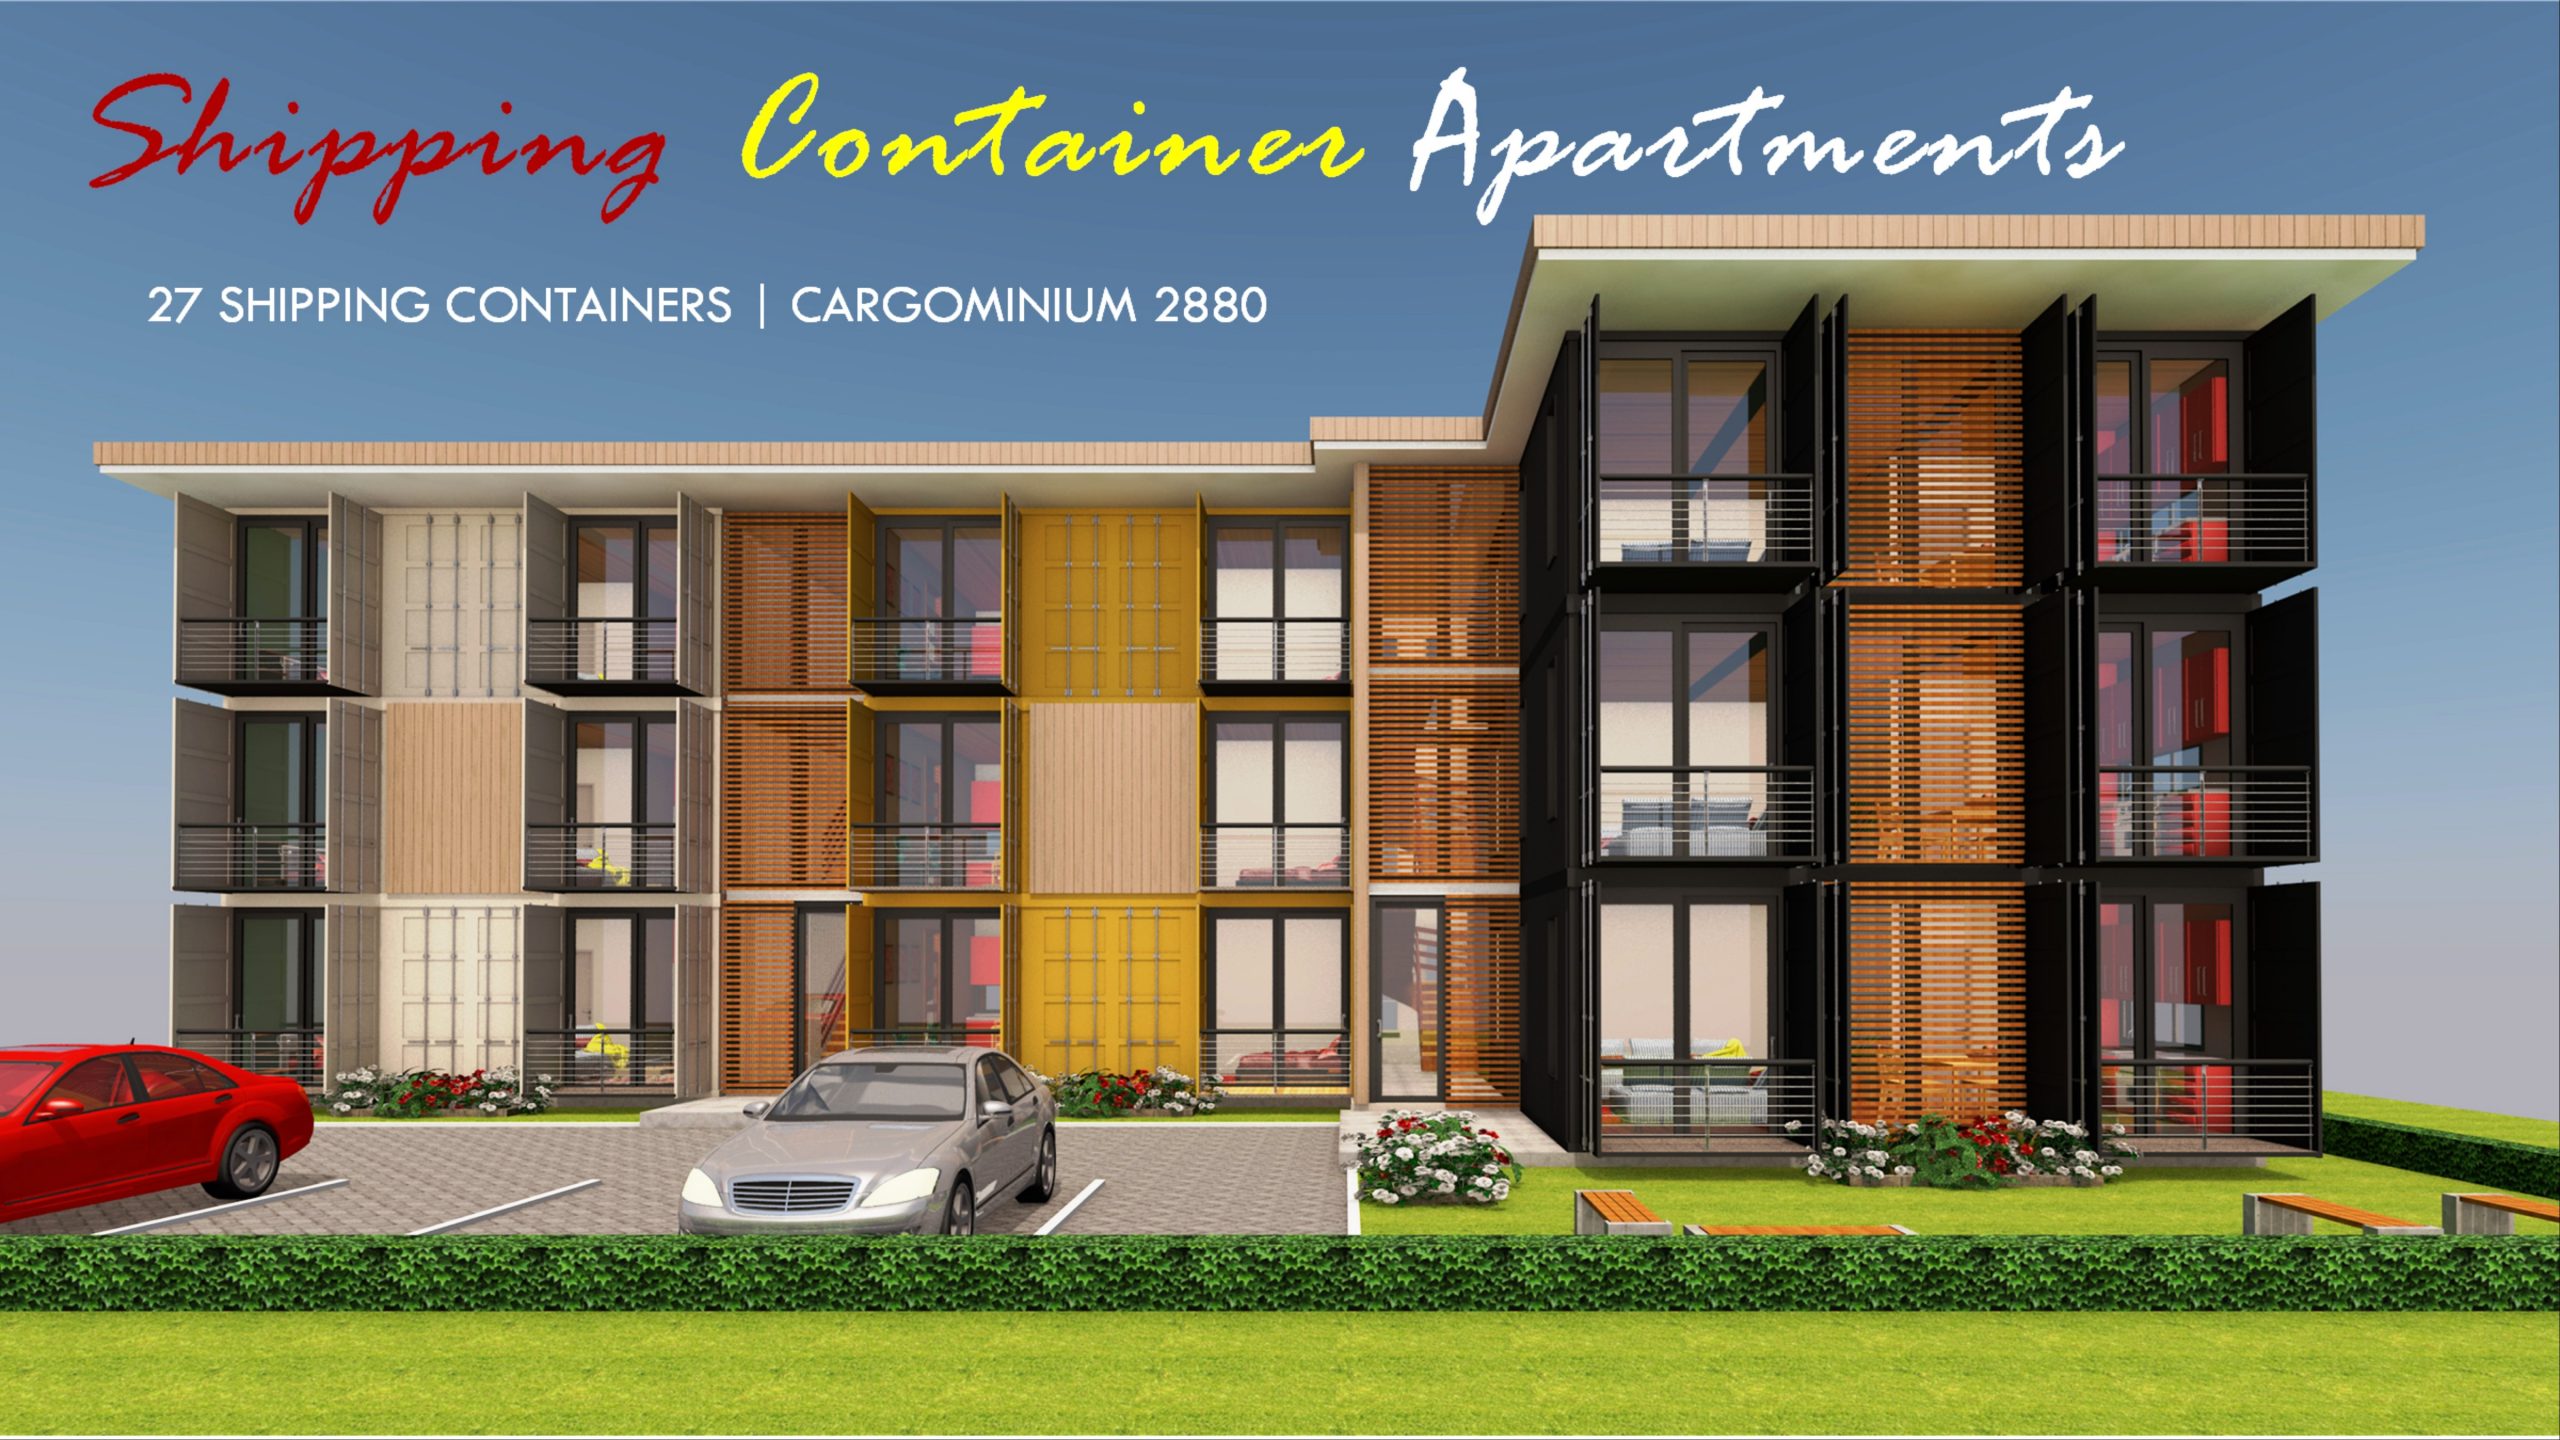 Shipping Container Apartments Design + Floor Plans 2019